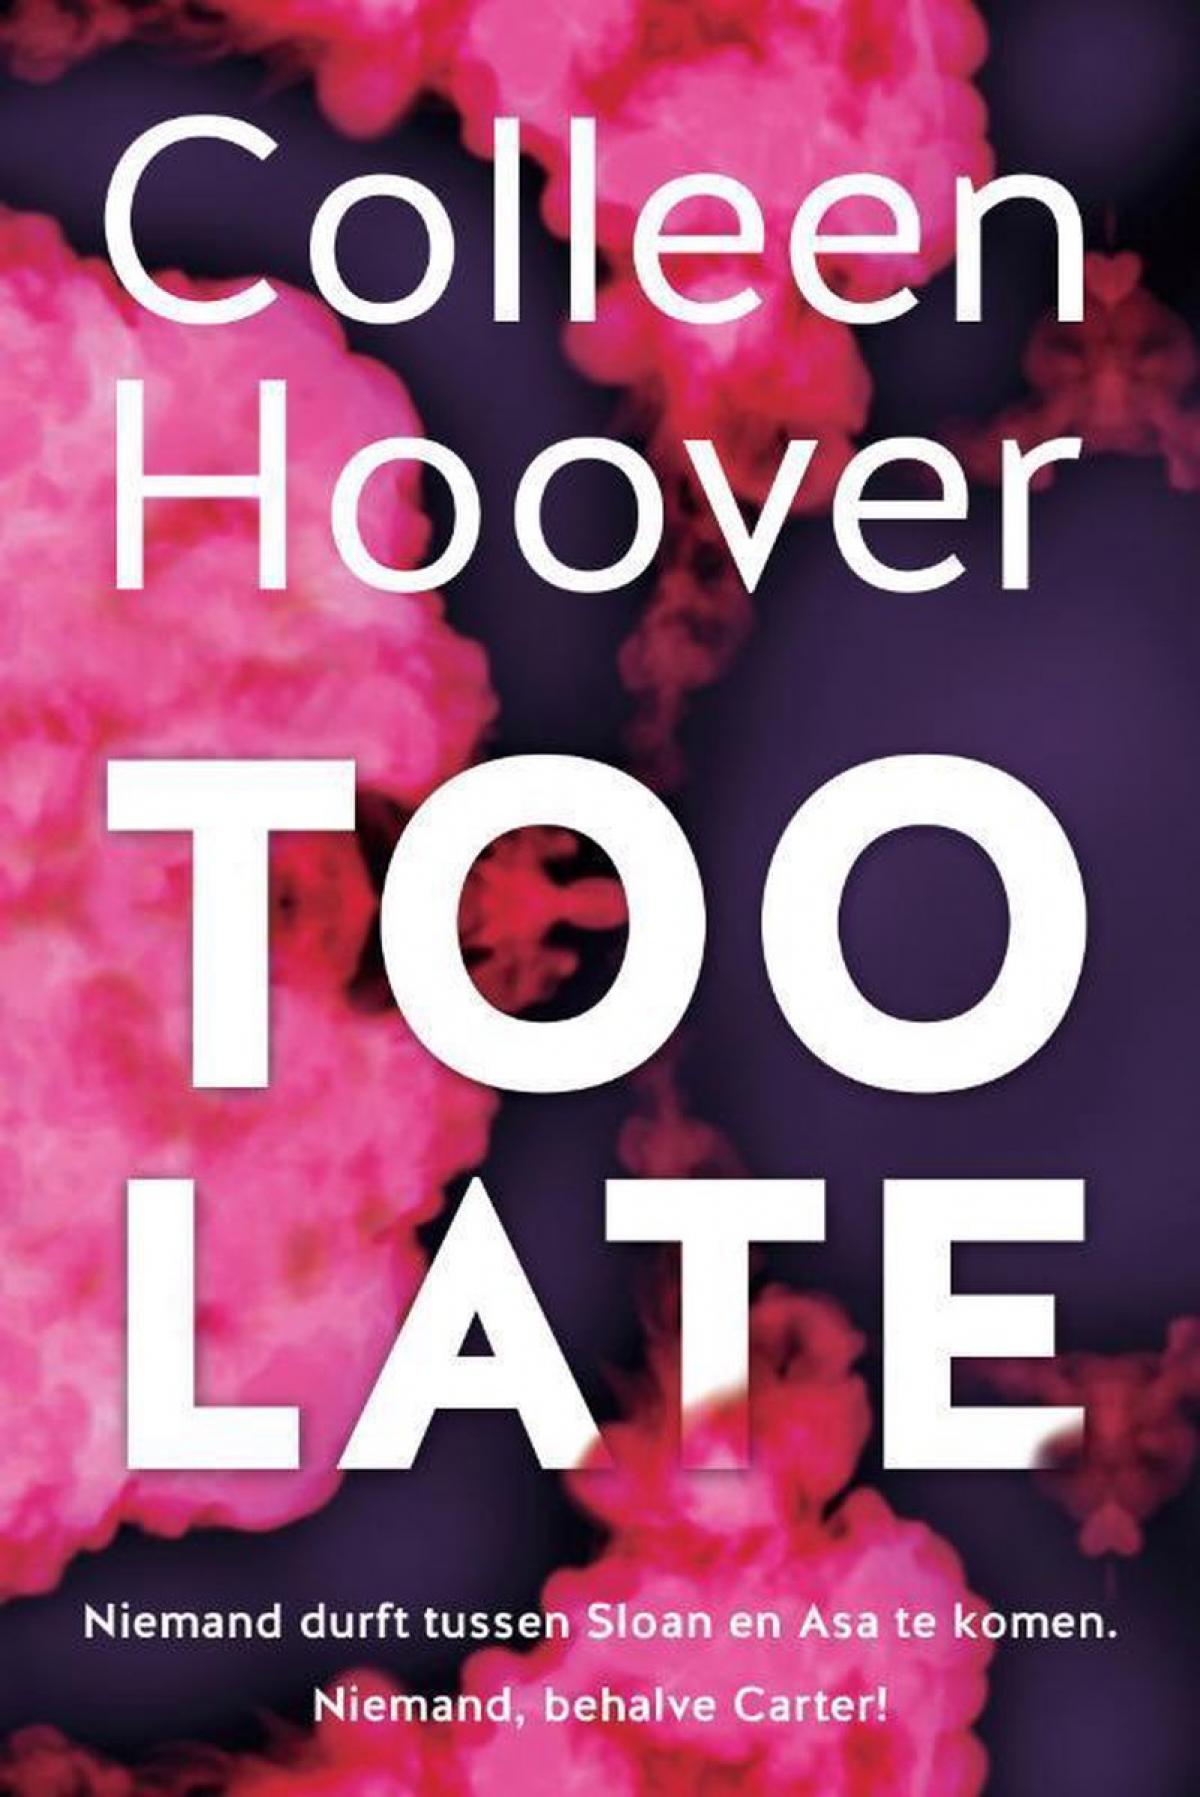 Too late - Colleen Hoover